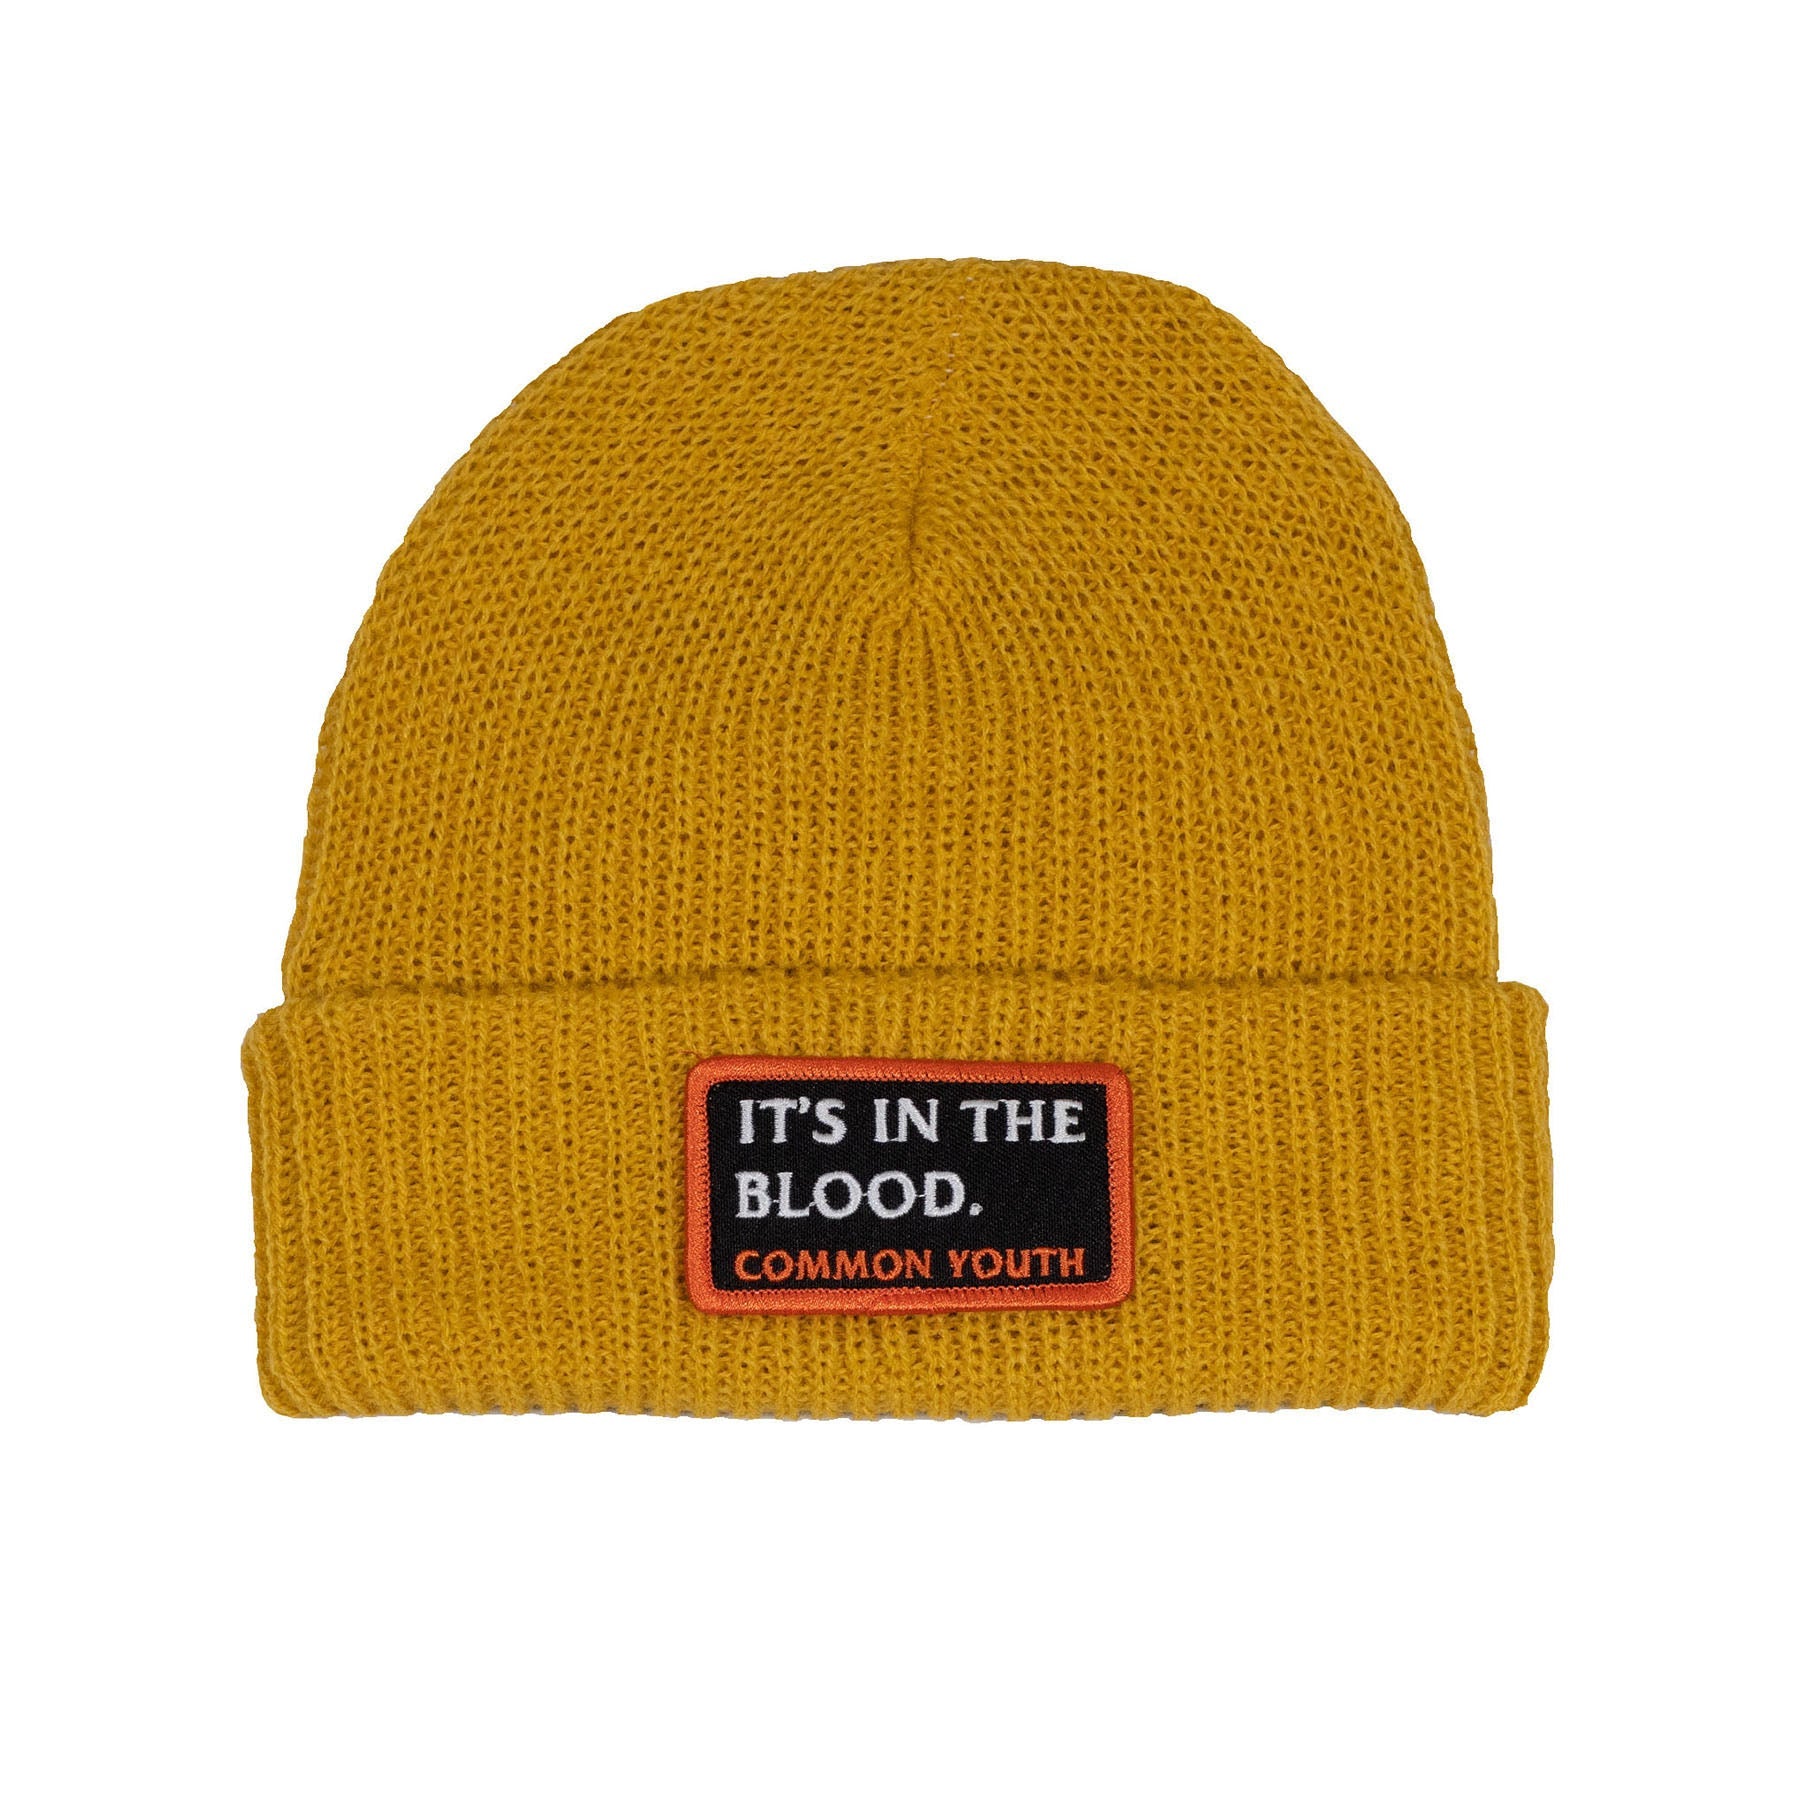 BLOOD PATCH BEANIE - commonyouthbrand